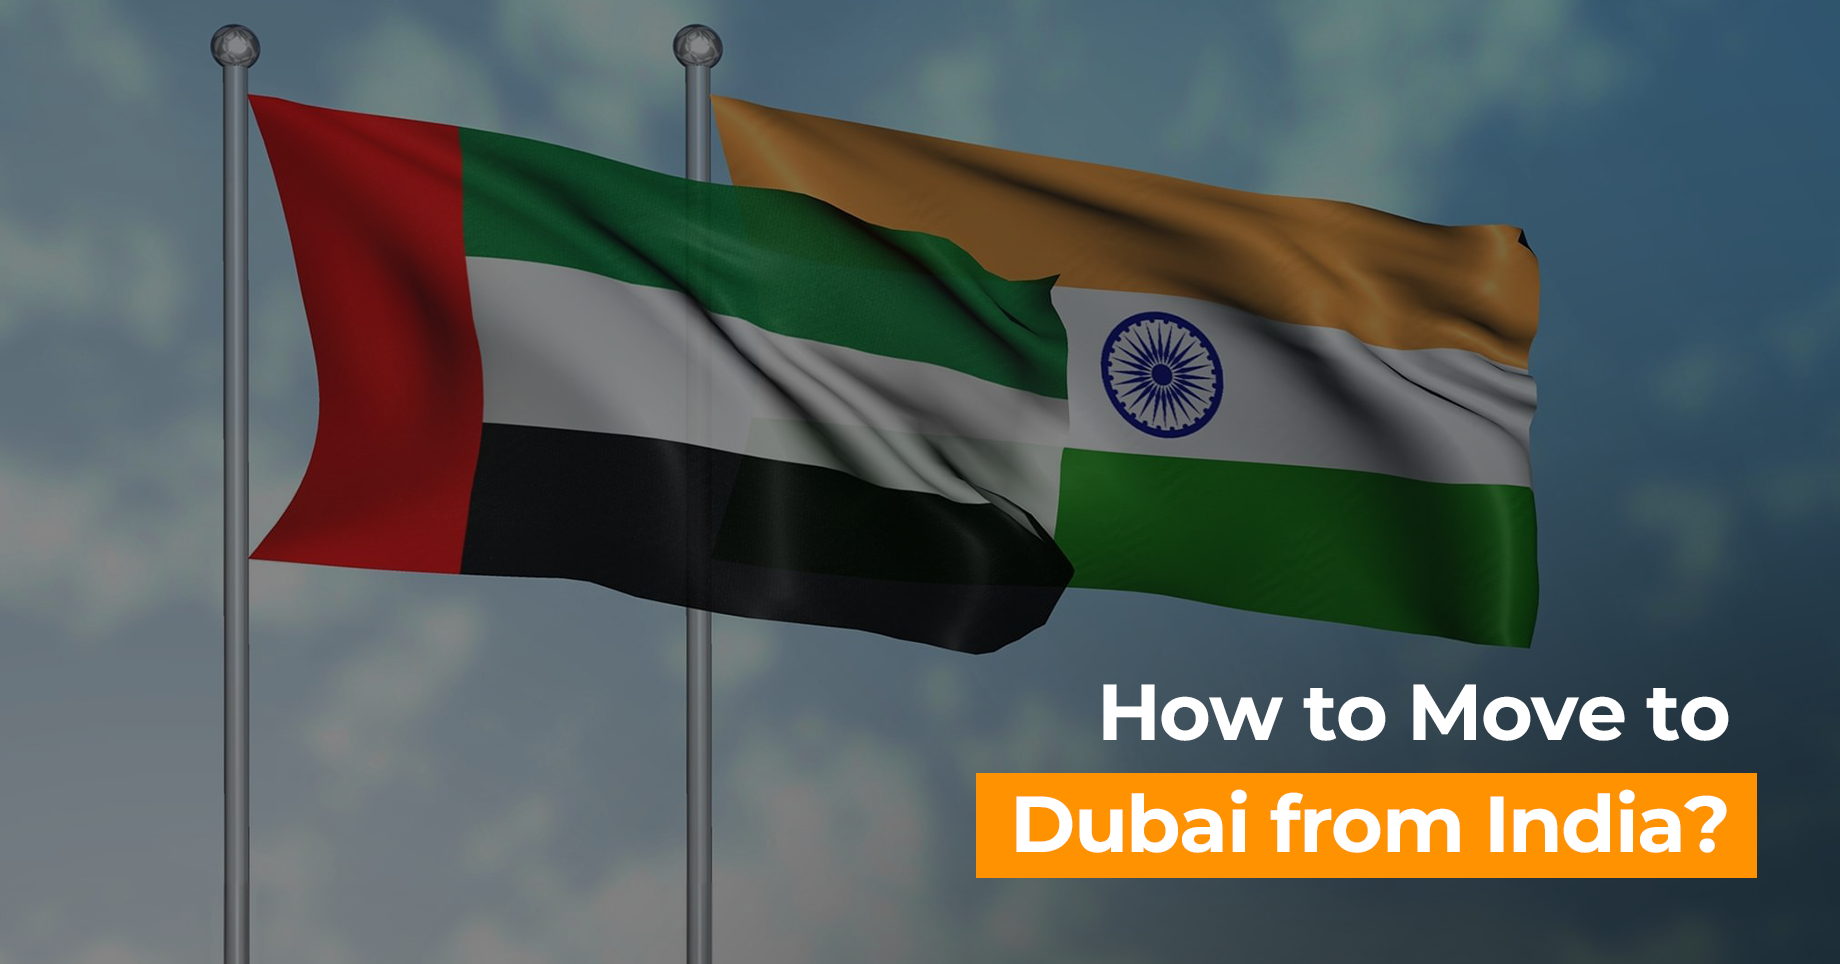 How to Move to Dubai from India?